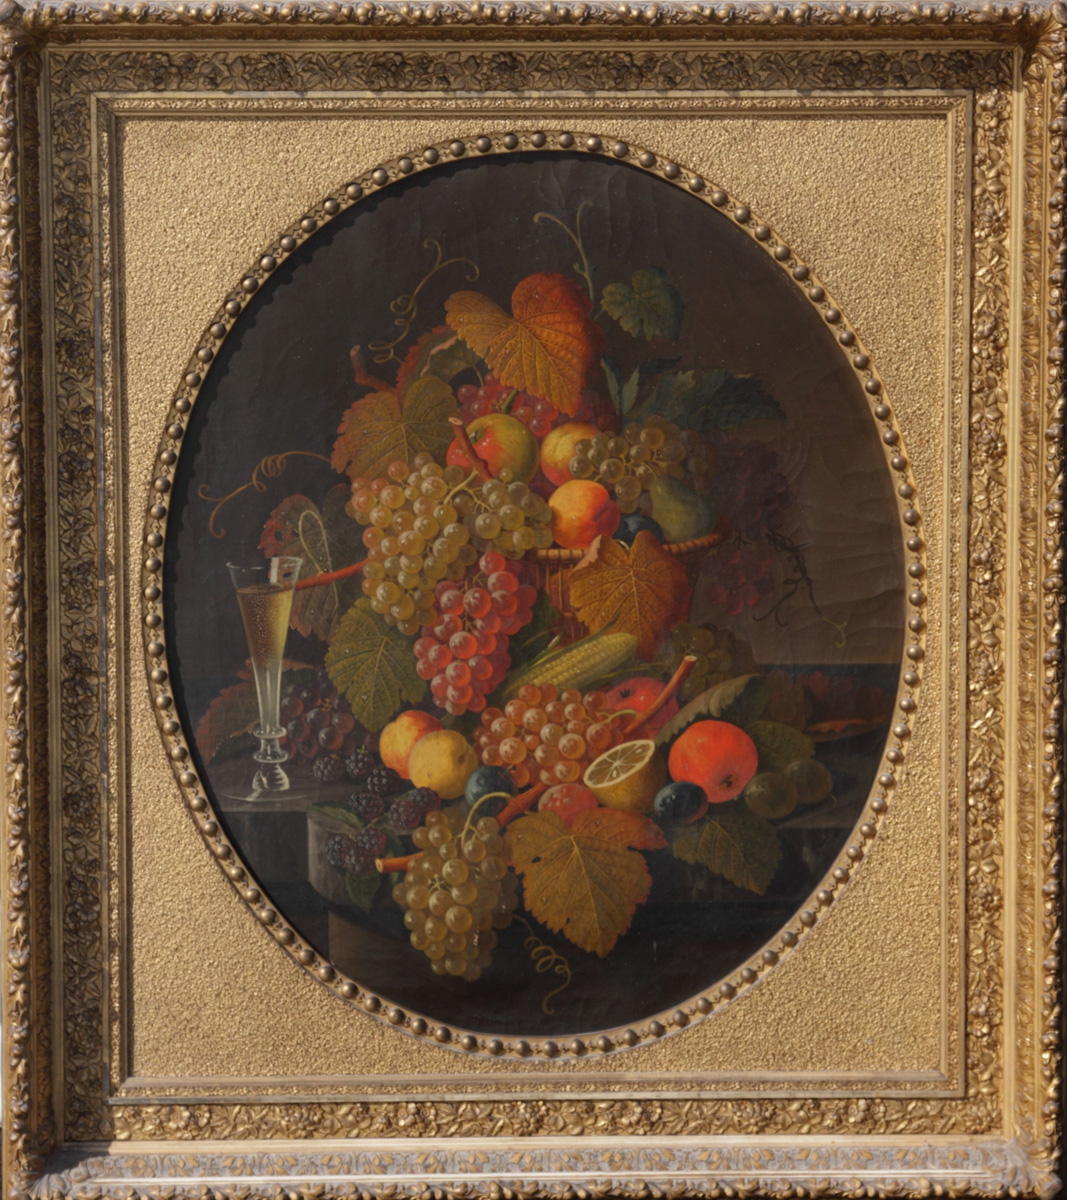 Unsgn. 19th Cent. Still Life of